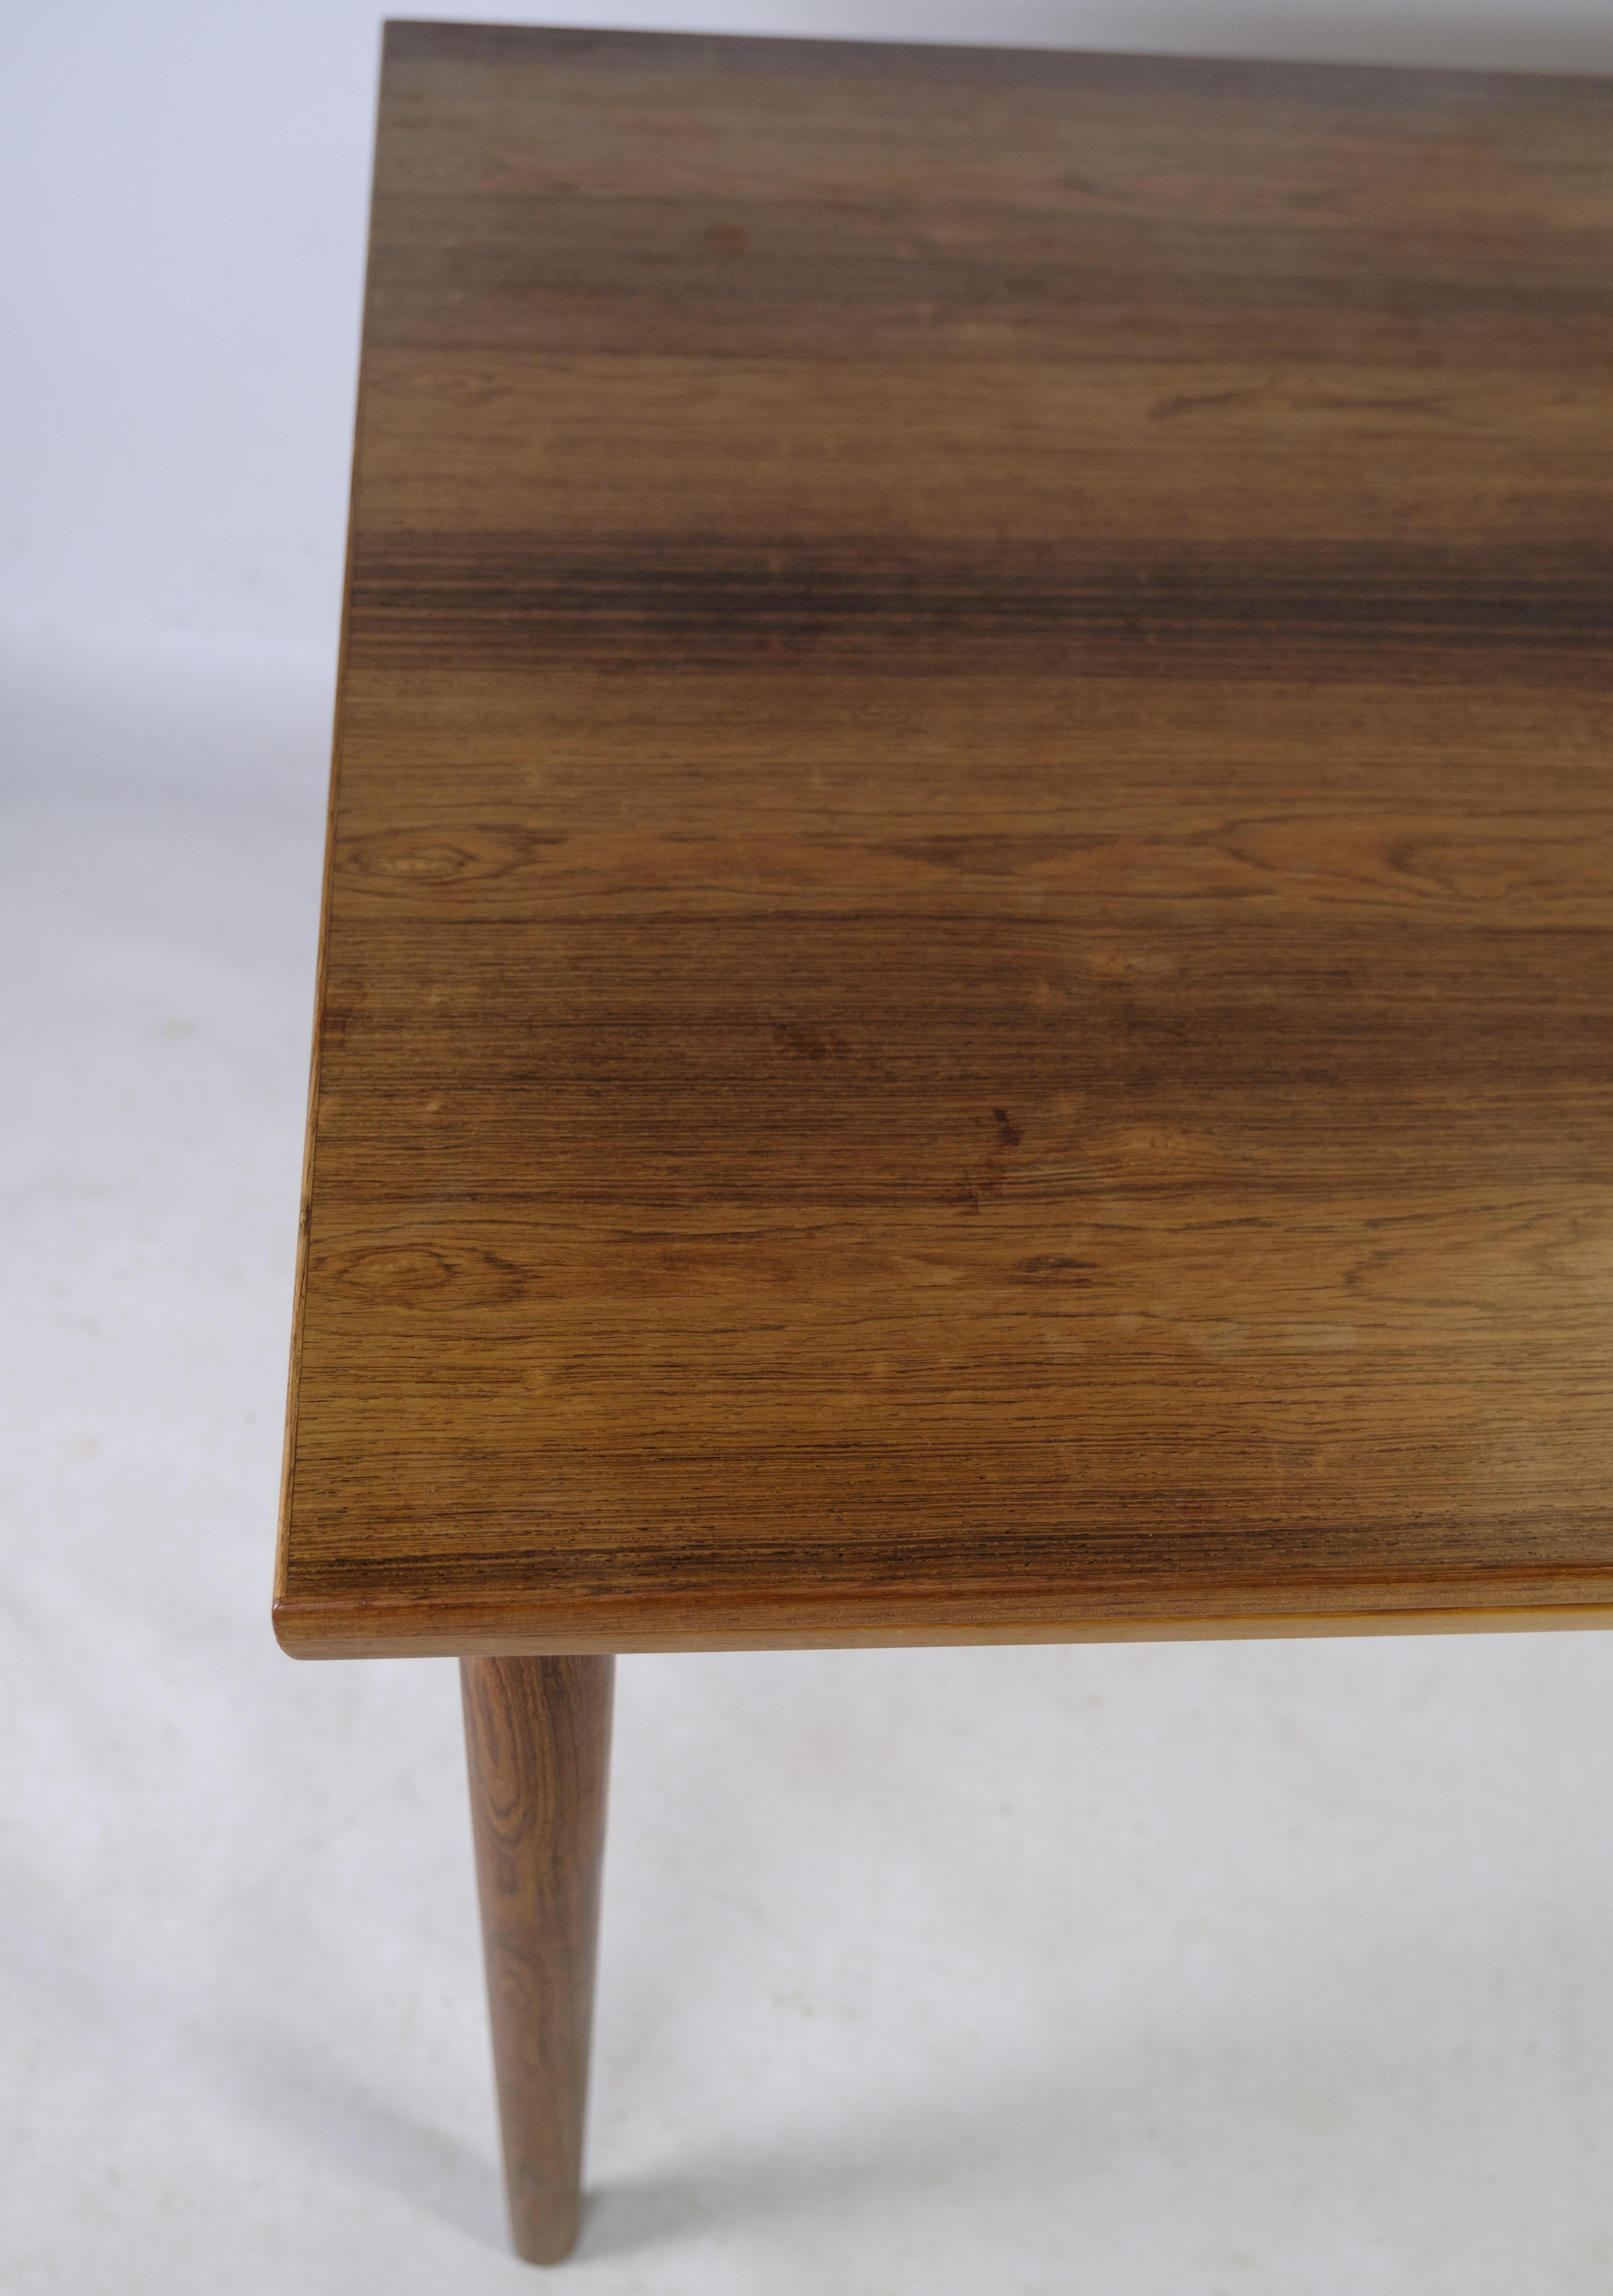 Mid-Century Modern Dining Table, Danish Design, Rosewood, Dutch Extensions, 1960s For Sale